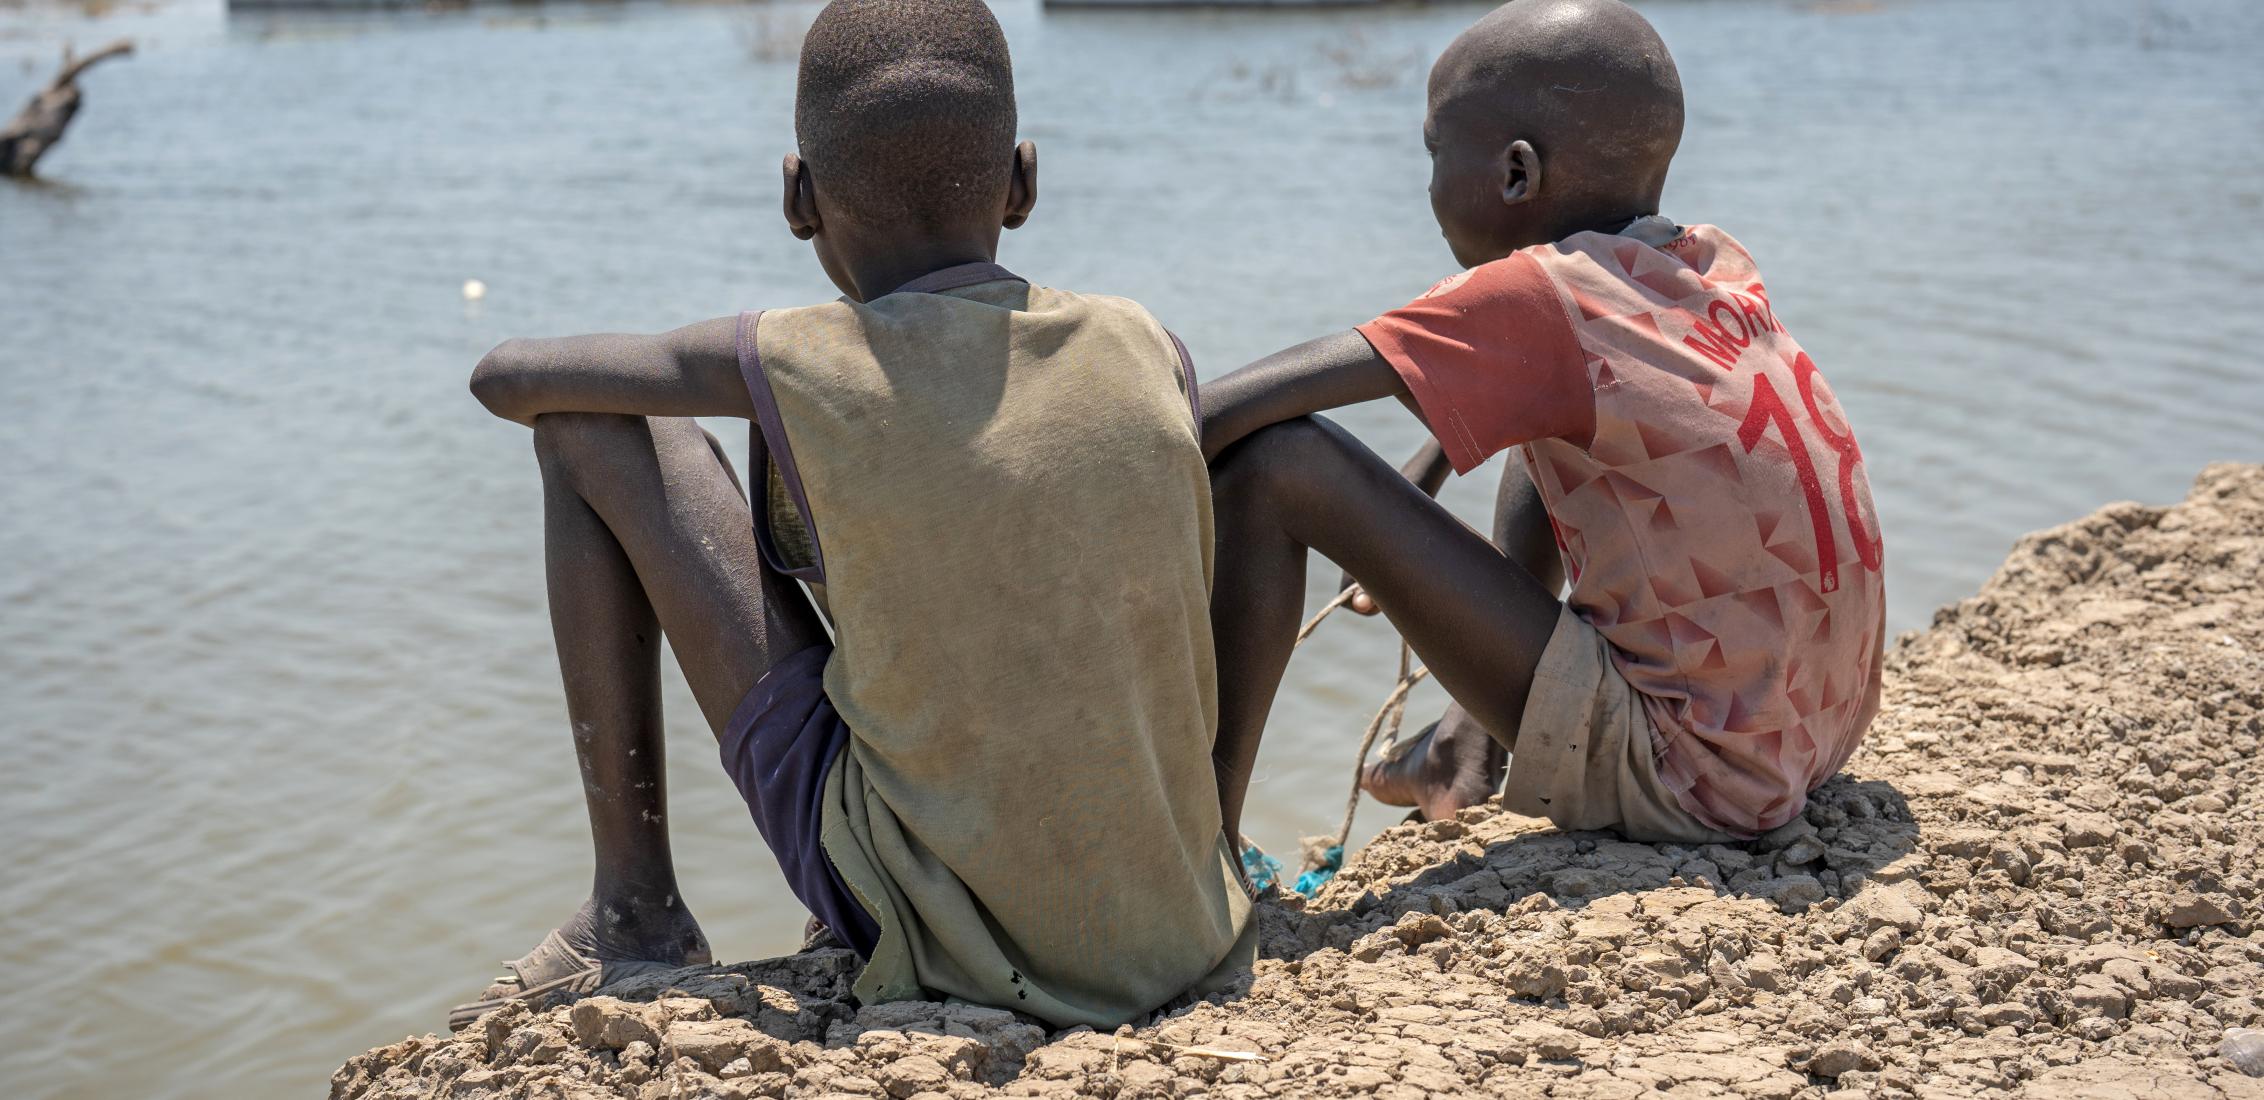 UNI424890/Naftalin On 4 March 2023, two boys look out over their flooded school in Bentiu, Unity State, South Sudan. Extensive flooding has affected thousands of people across Unity State with many having to flee their homes.